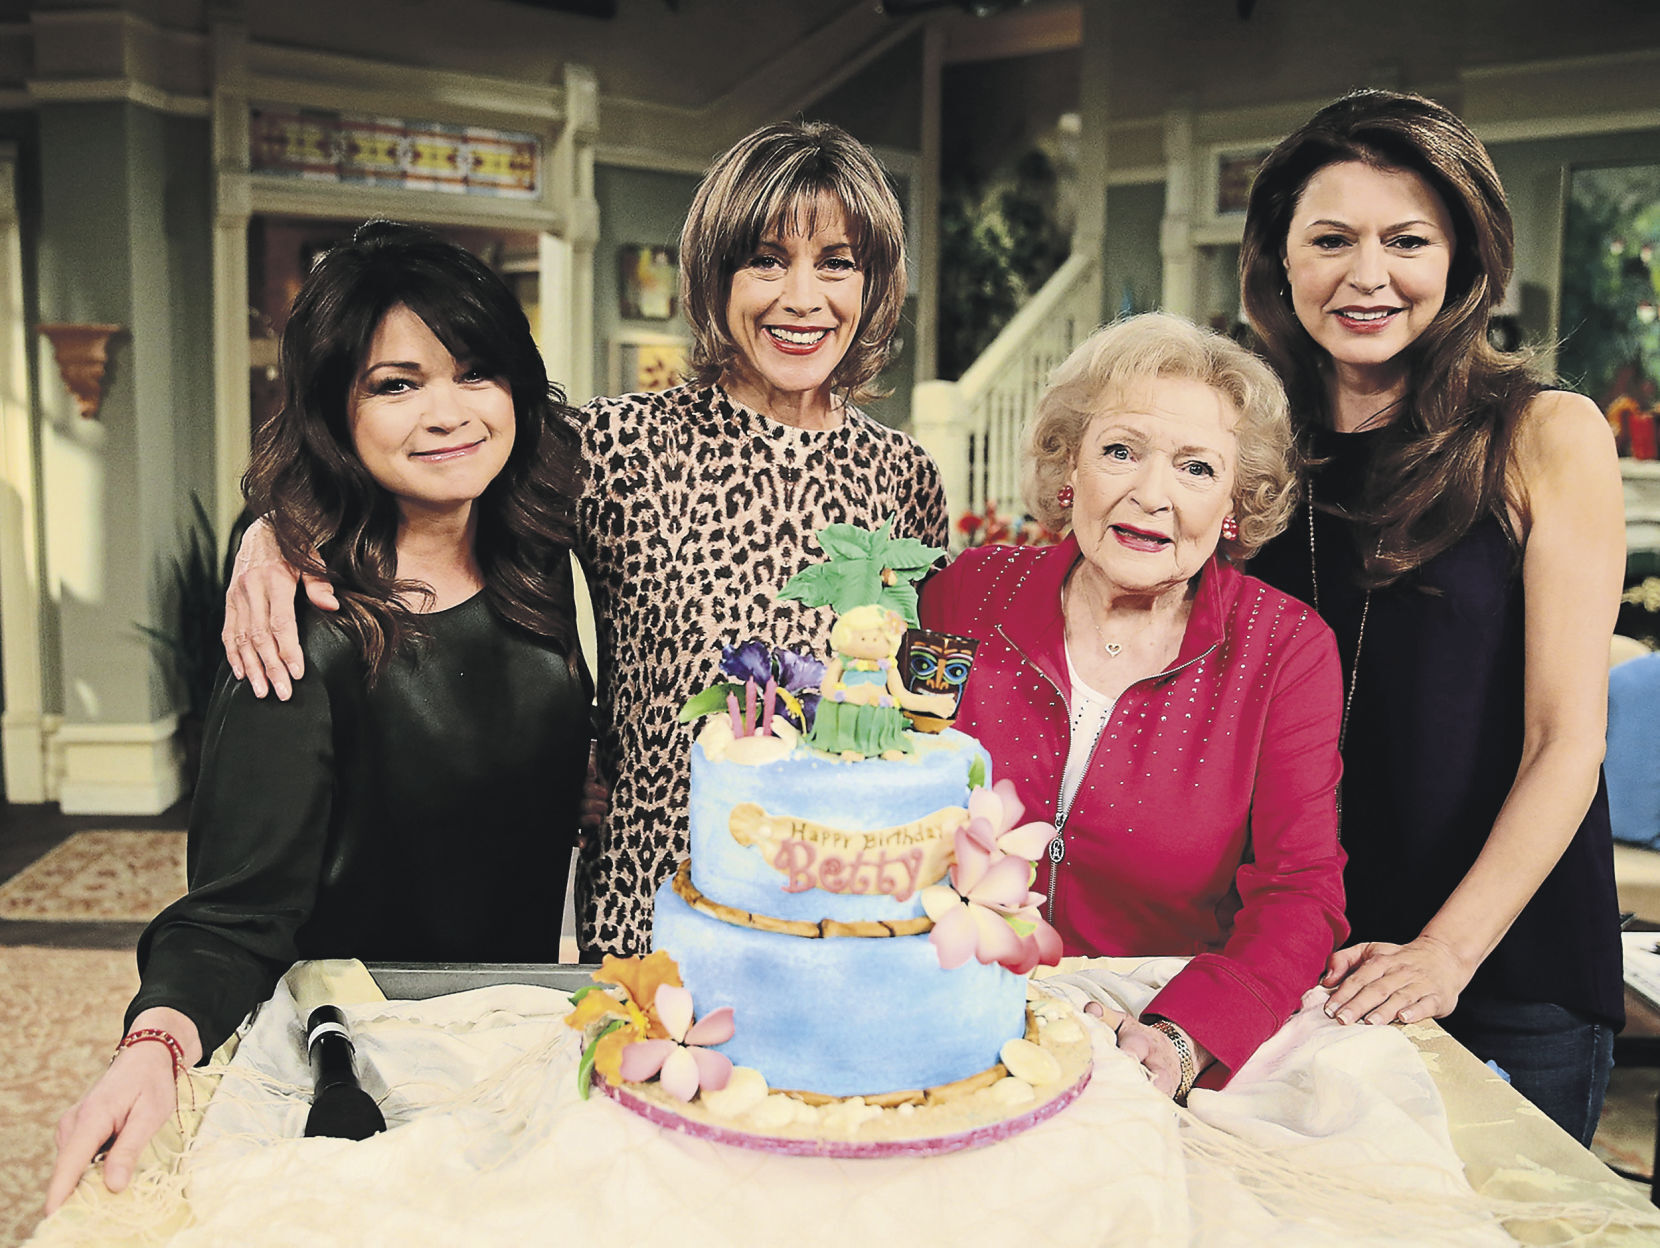 Actresses Valerie Bertinelli (from left), Wendie Malick, Betty White and Jane Leeves pose at the Betty White celebration of her 93rd birthday on the set of “Hot in Cleveland” in 2015. Ray Richmond has written “Betty White: 100 Remarkable Moments in an Extraordinary Life,” about the longtime actress.    PHOTO CREDIT: Tribune News Service